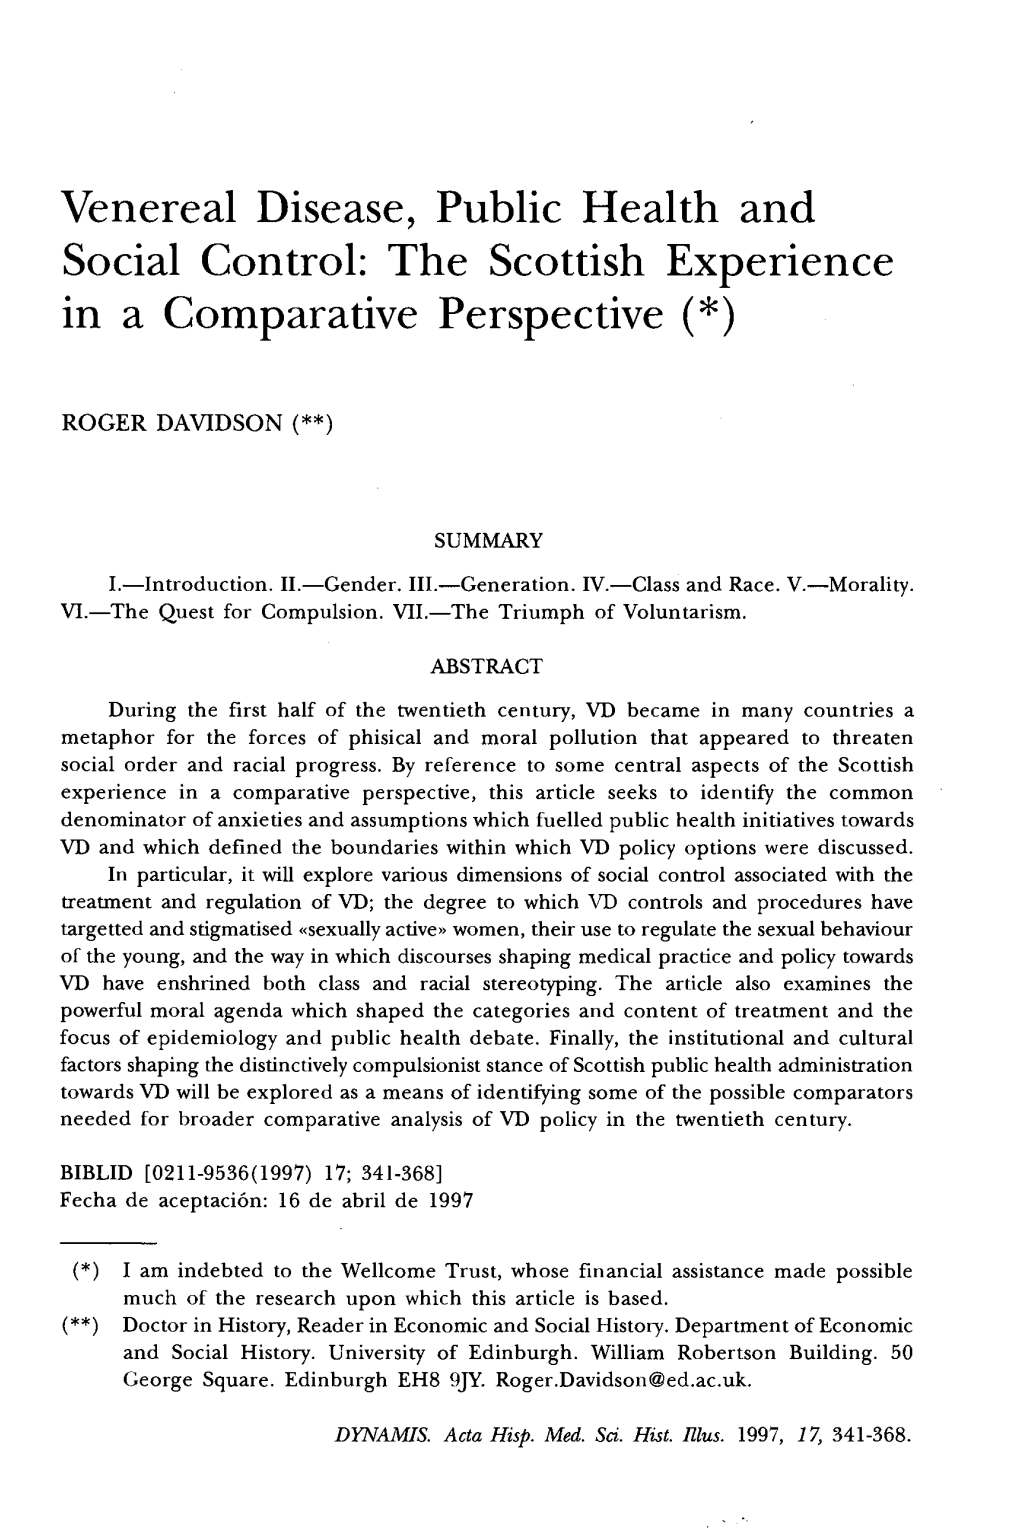 Venereal Disease, Public Health and Social Control: the Scottish Experience in a Comparative Perspective (*)